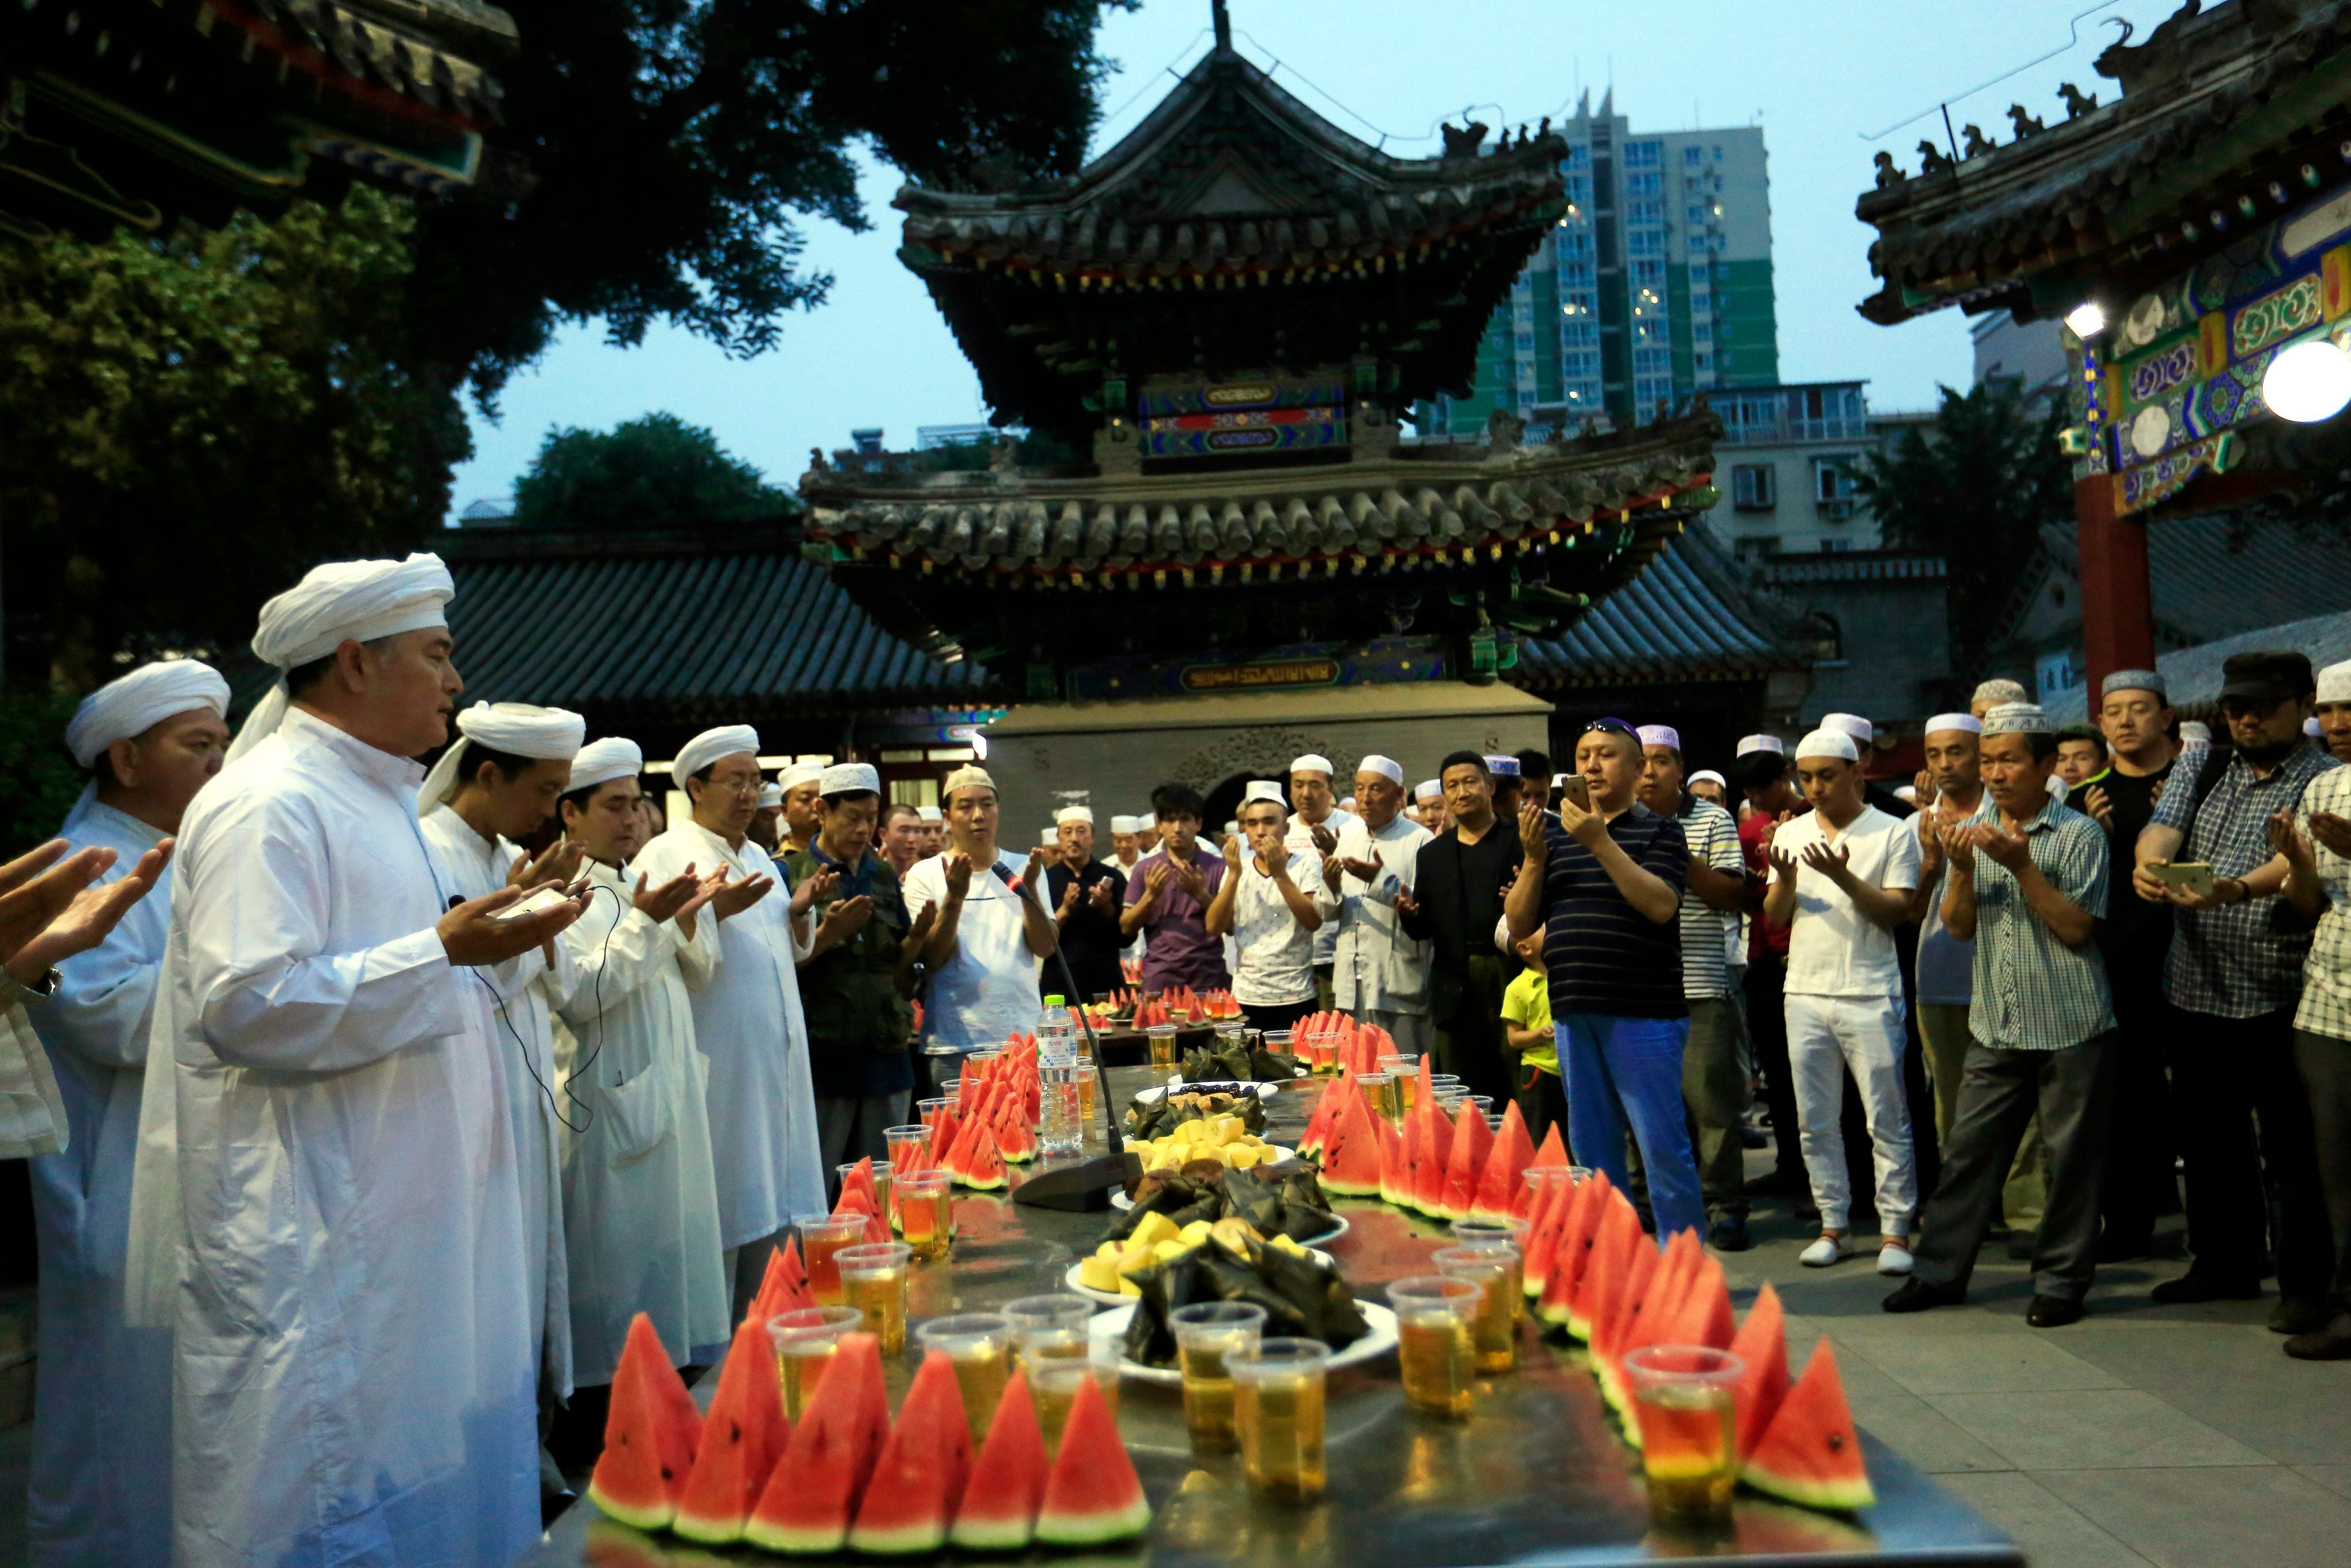 Chinese Muslims pray during a ceremony for breaking fast on the first day of Ramadan at Niujie Mosque in Beijing, China